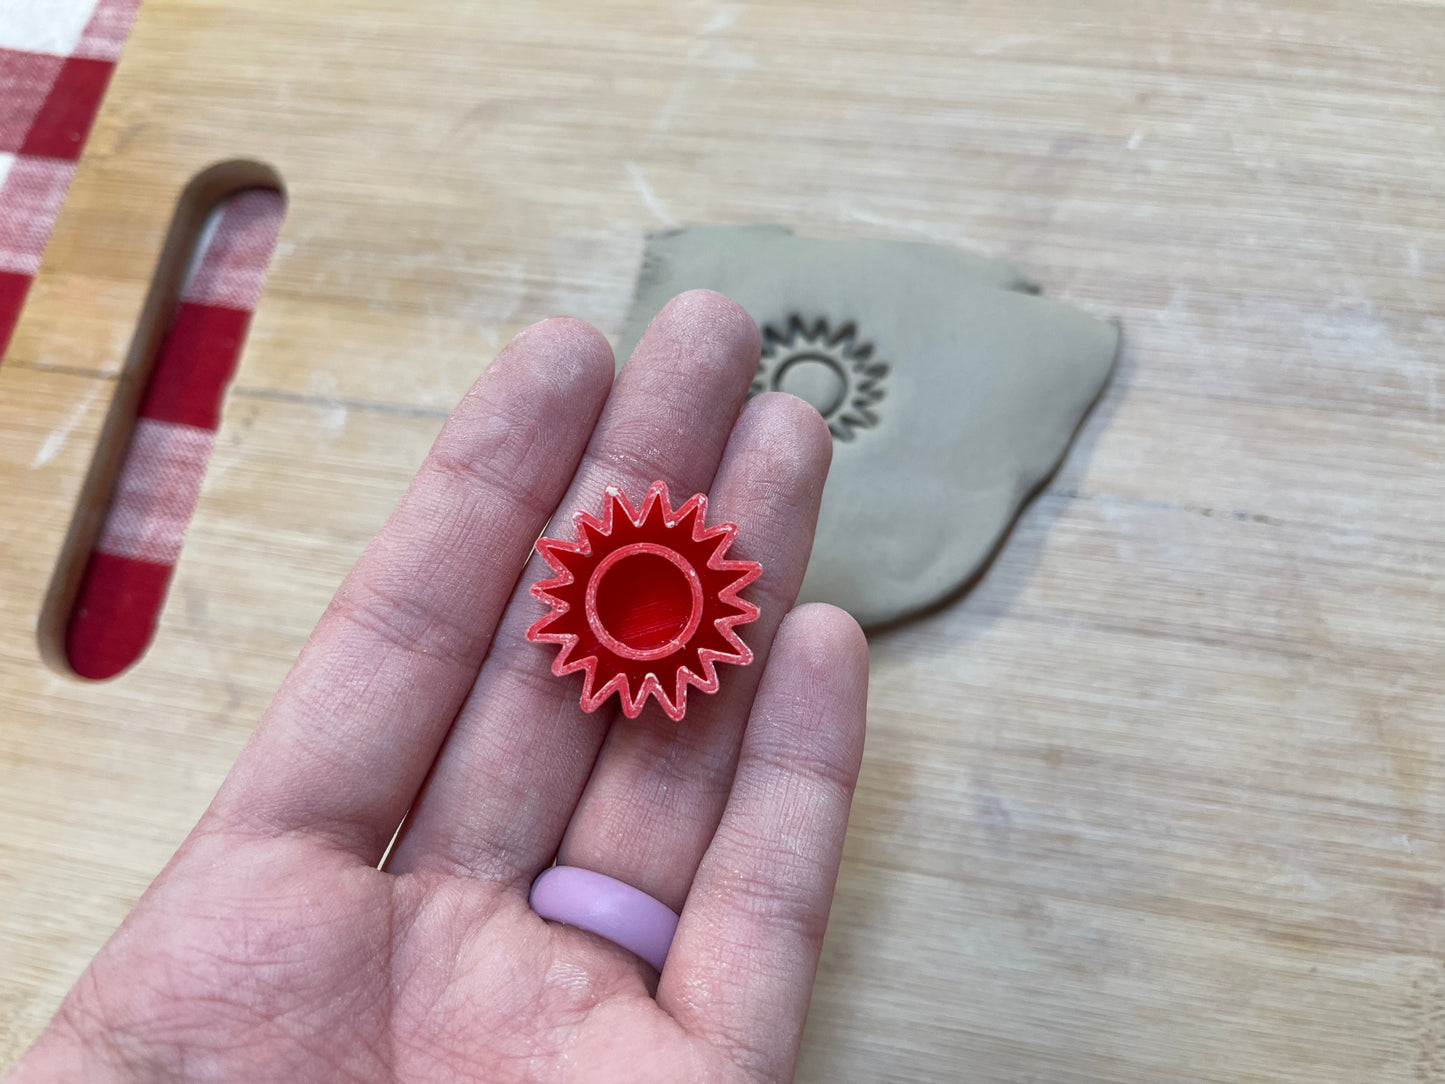 Sun Mini stamp - July 2021 stamp of the month, plastic 3D printed, multiple sizes